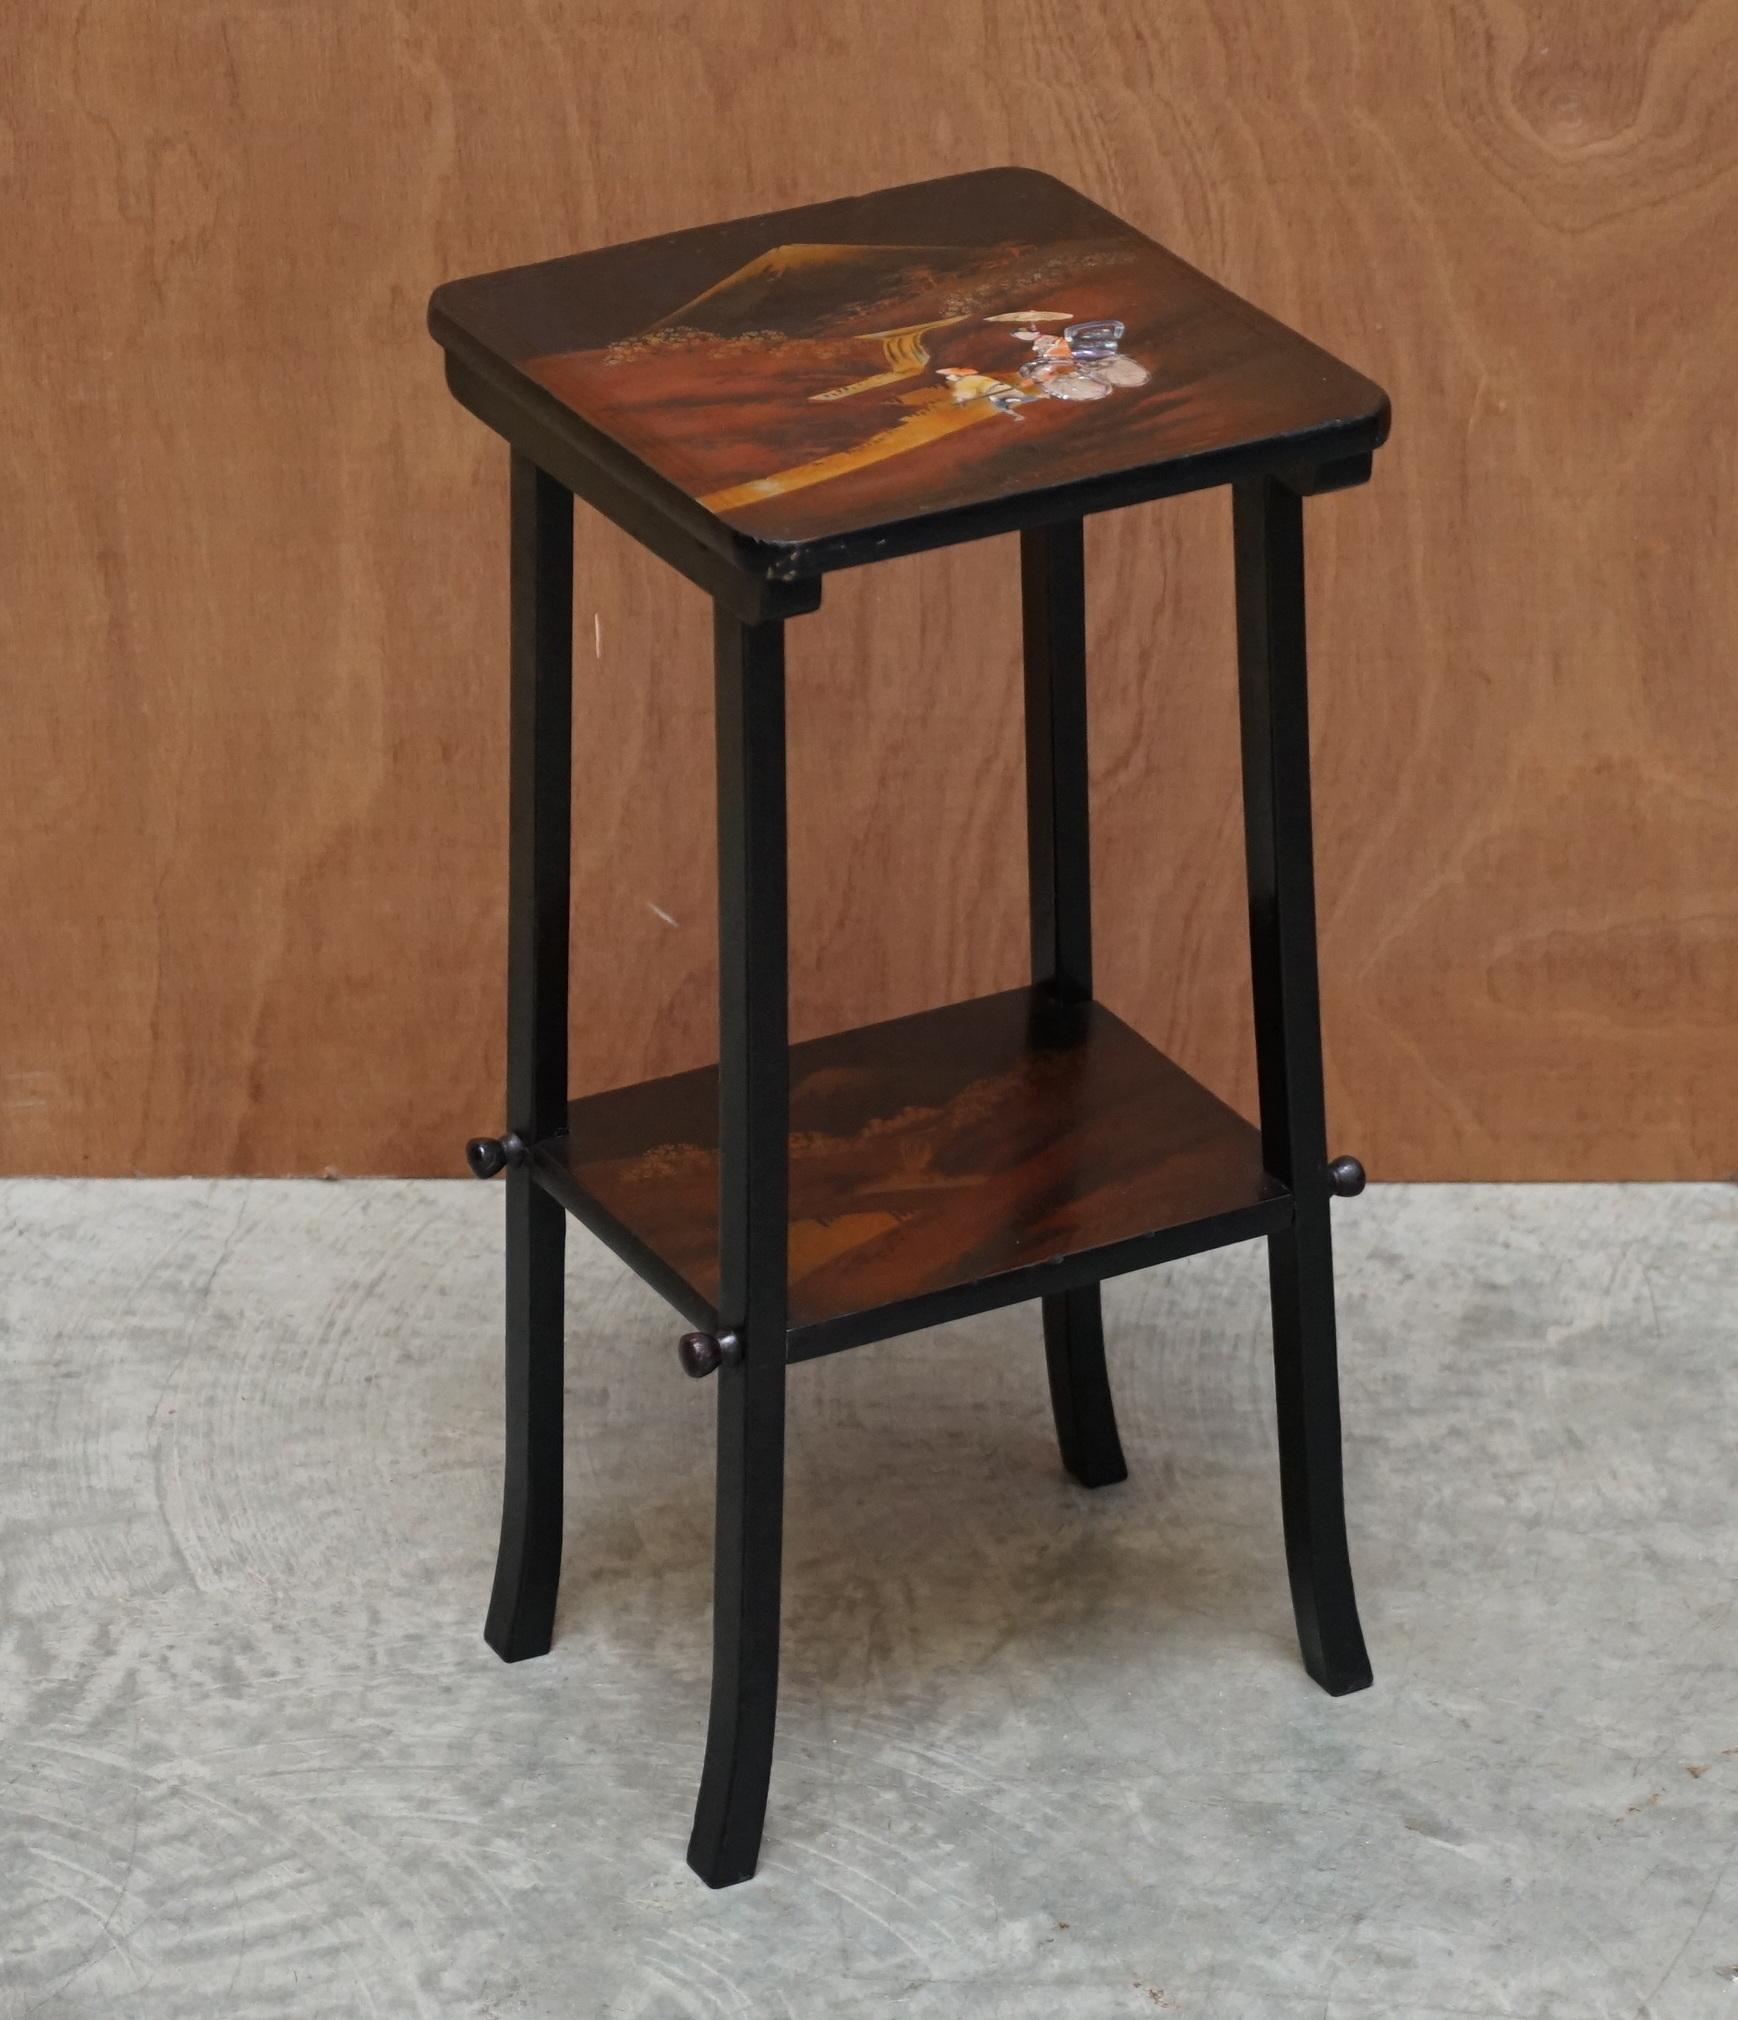 We are delighted to offer this stunning antique Japanese Shibayyama inlaid side table depicting a rickshaw driver and client in mother of pearl

This table is sublime, absolutely exquisite from every angle, circa 1900, hand made in Japan, the